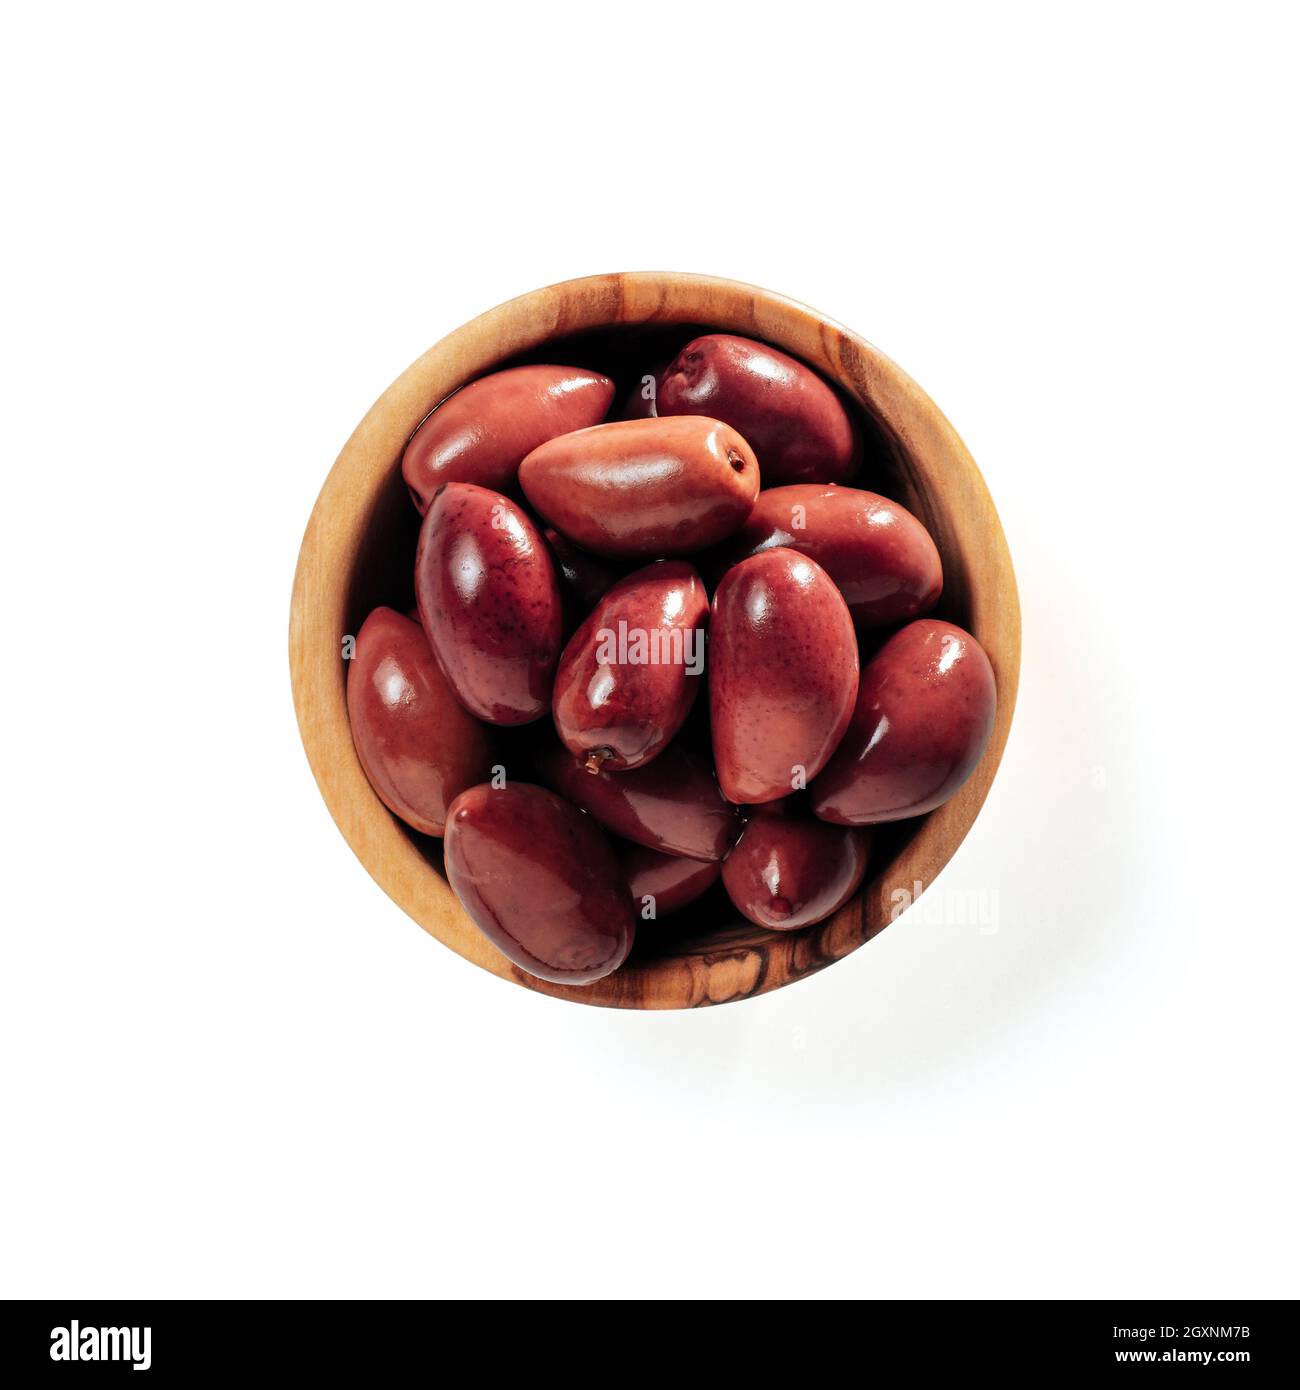 Small wooden bowl with red kalmata olives isolated on white background. Flat lay or top view of small beautiful olive tree bowl with full red olives, Stock Photo